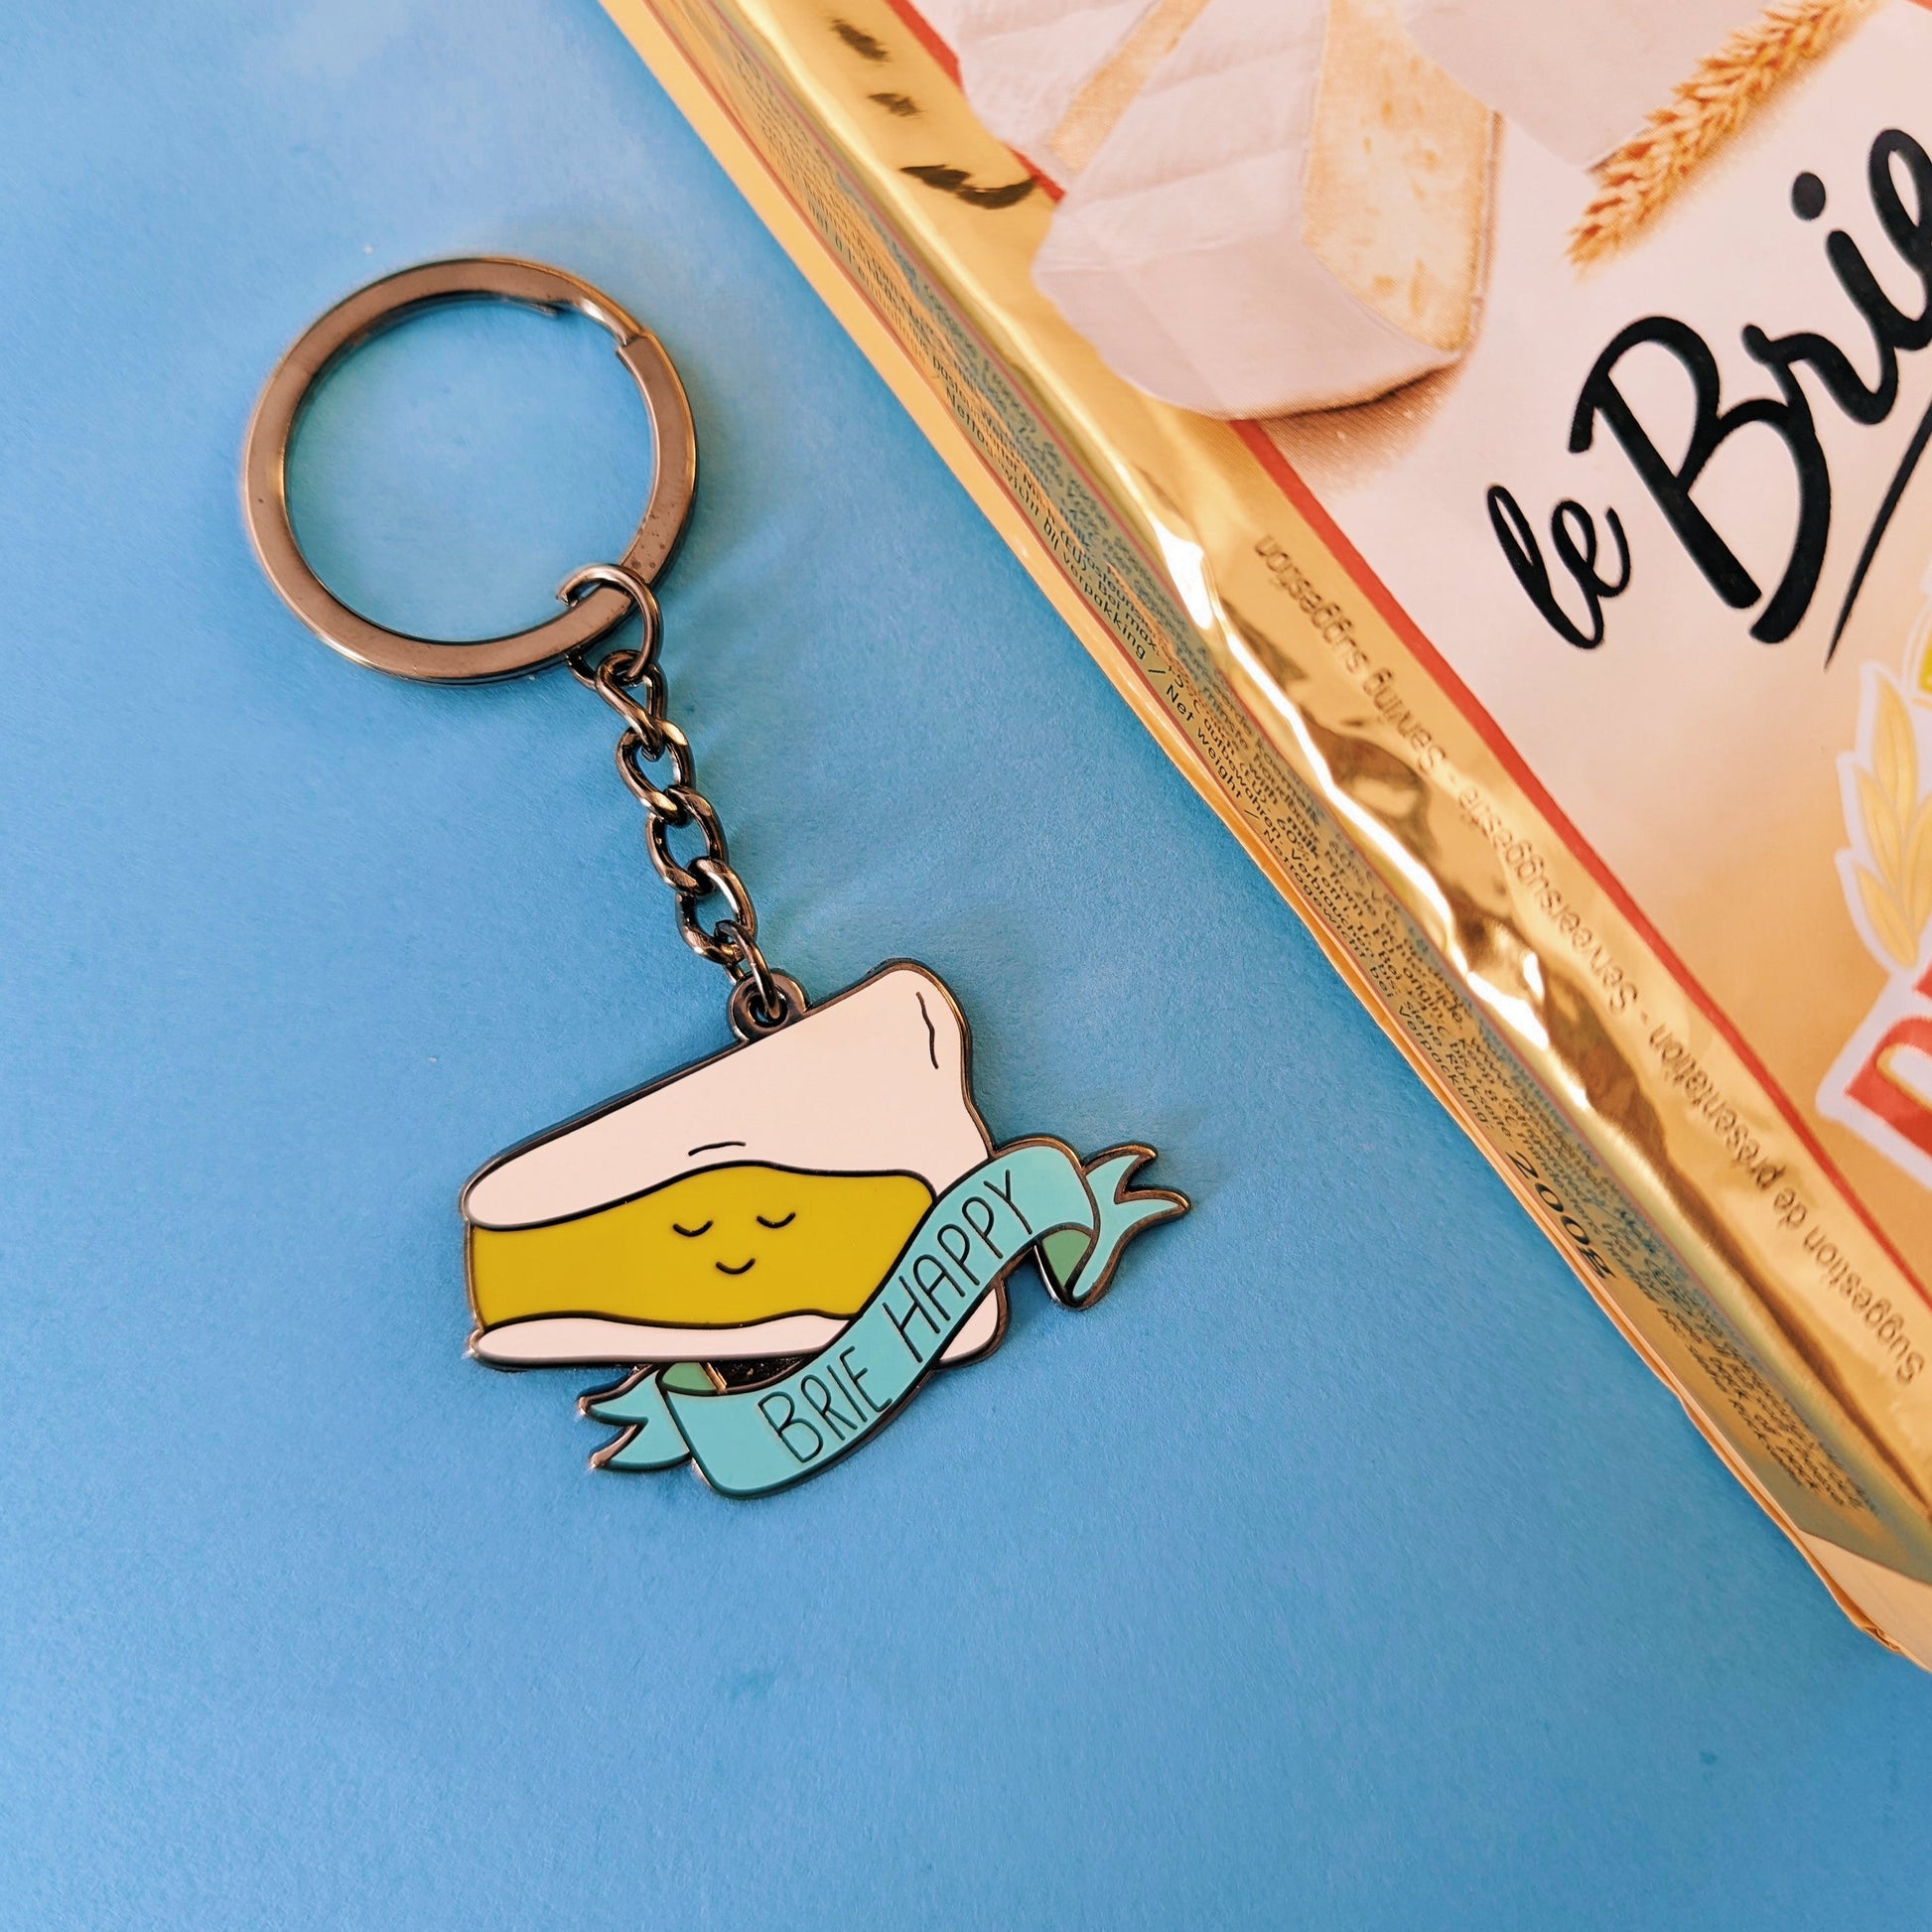 Brie Happy Cheese Keyring - QuinnsPins